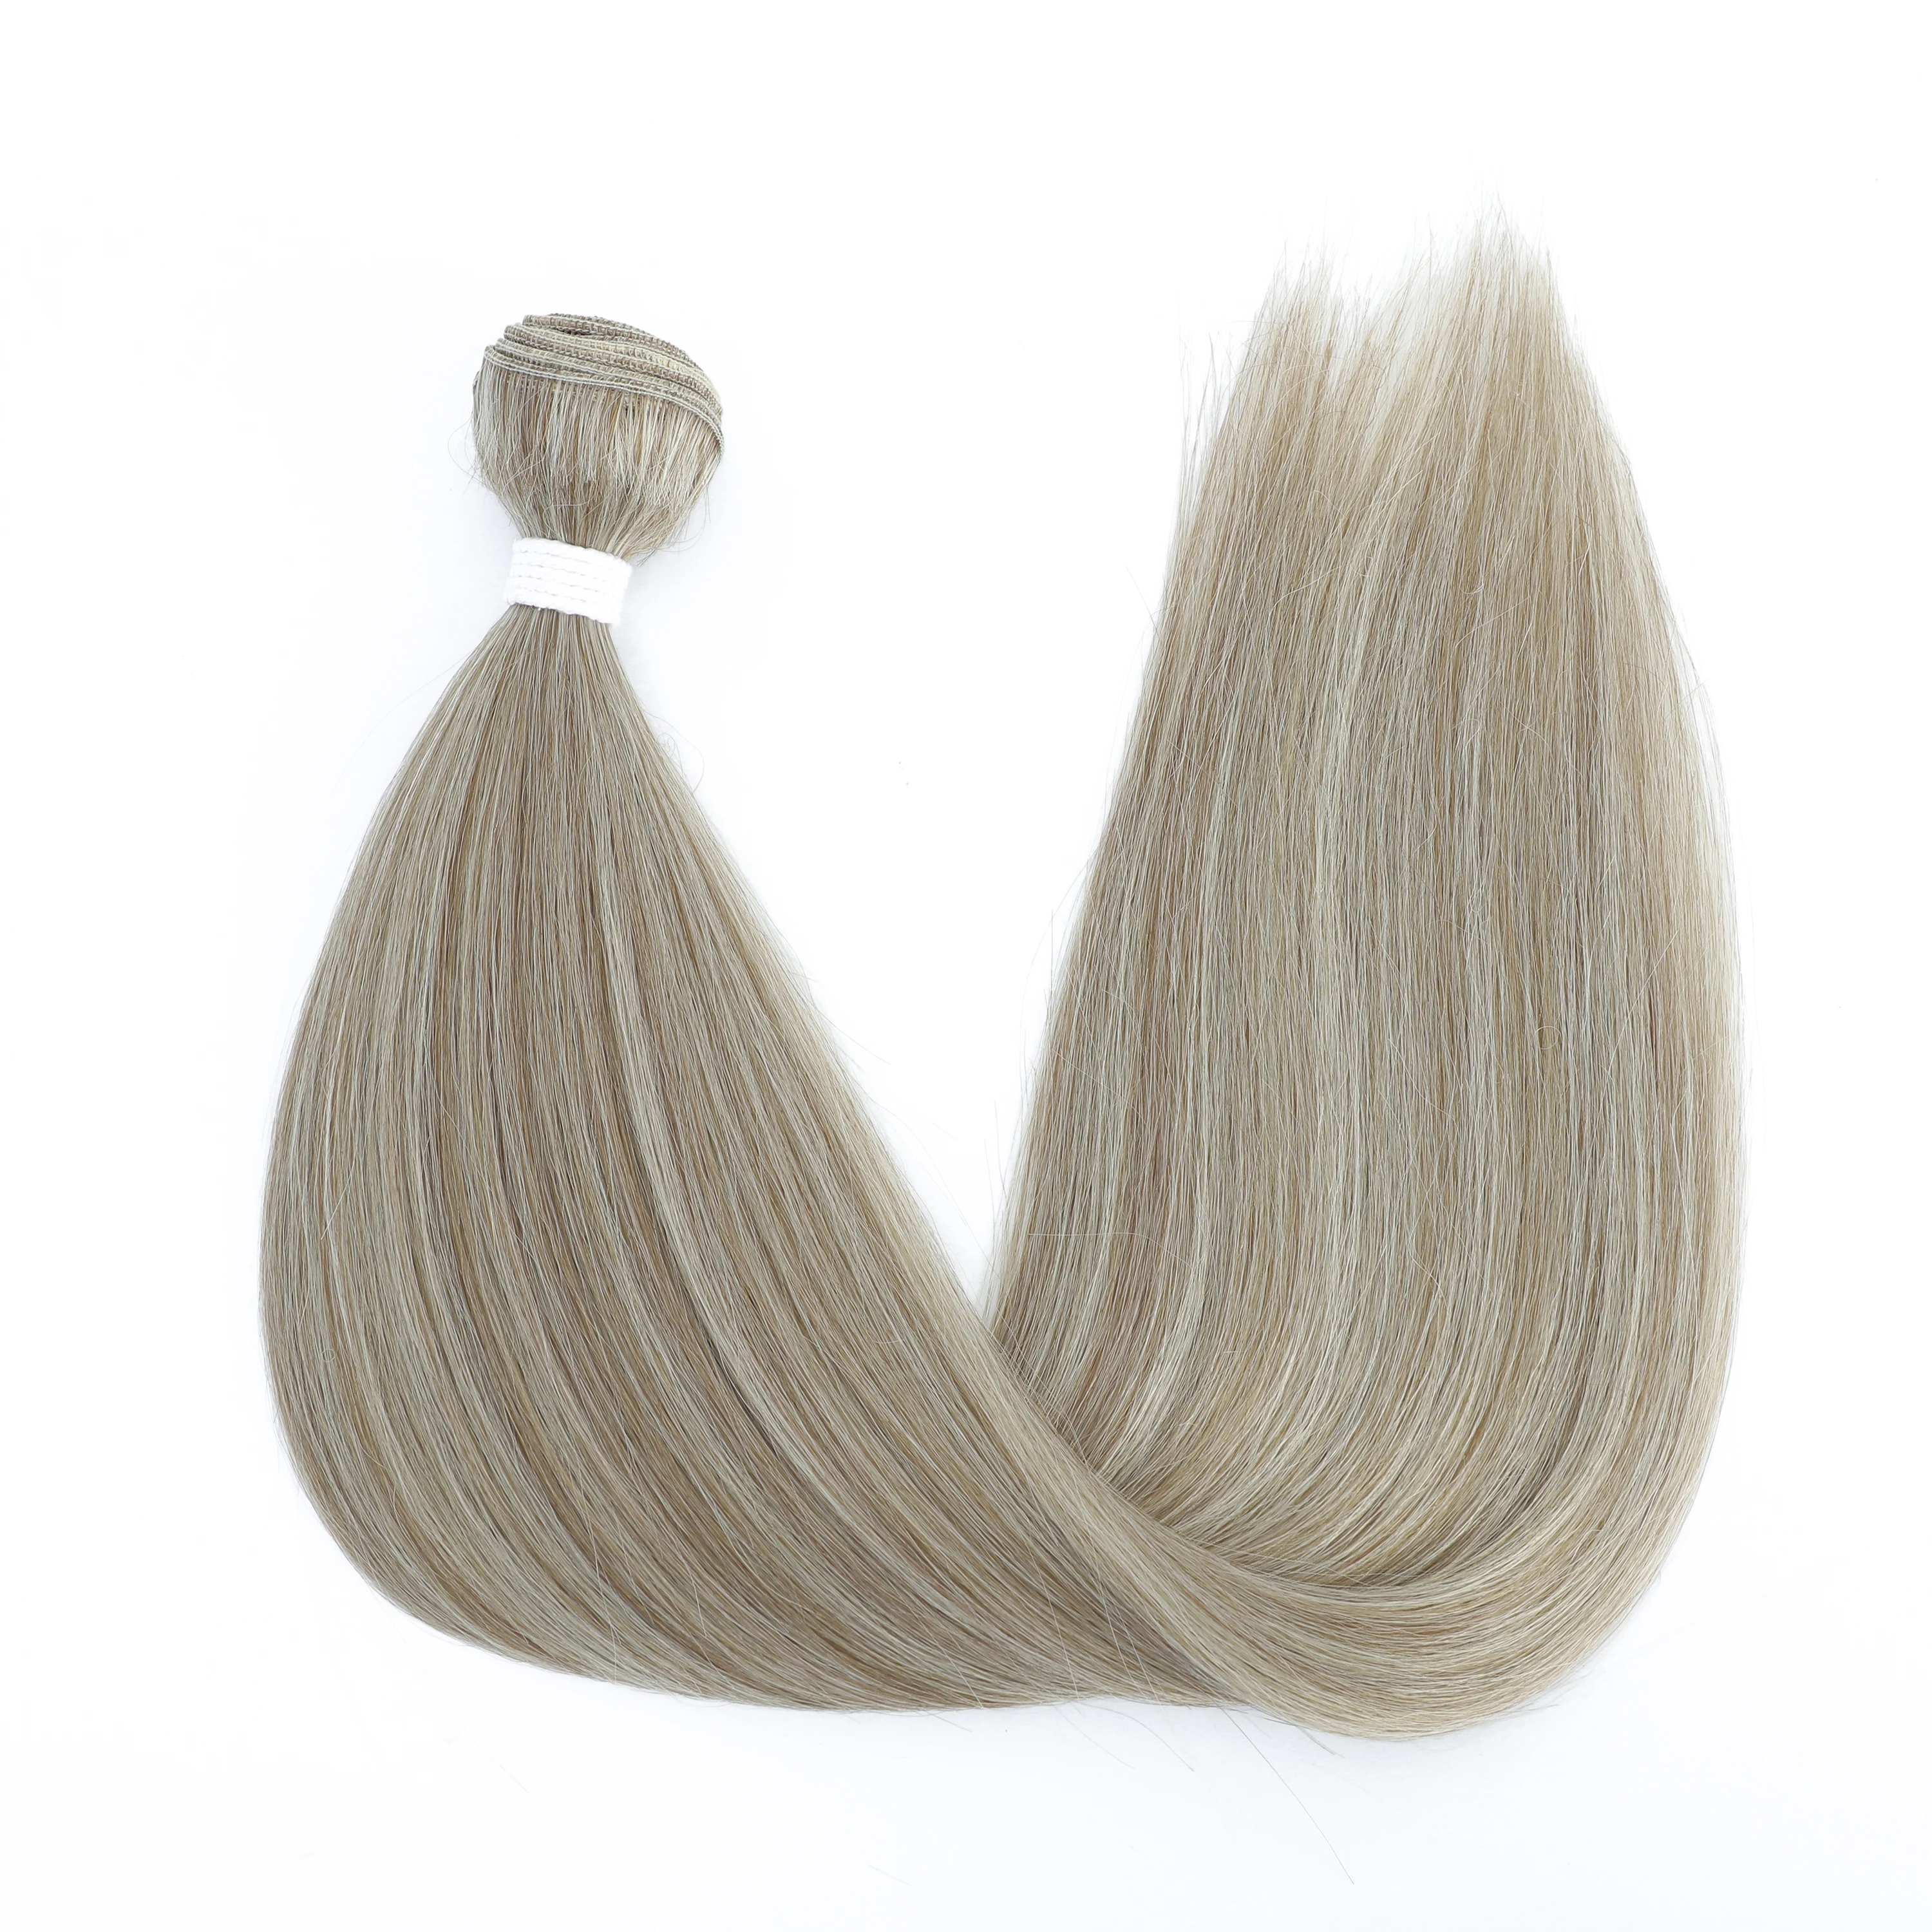 Piano Blonde Straight Hair Bundles Smooth Hair Extensions Fake Fibers Synthetic Yaki Straight Hair Weaving Full to End Free Ship